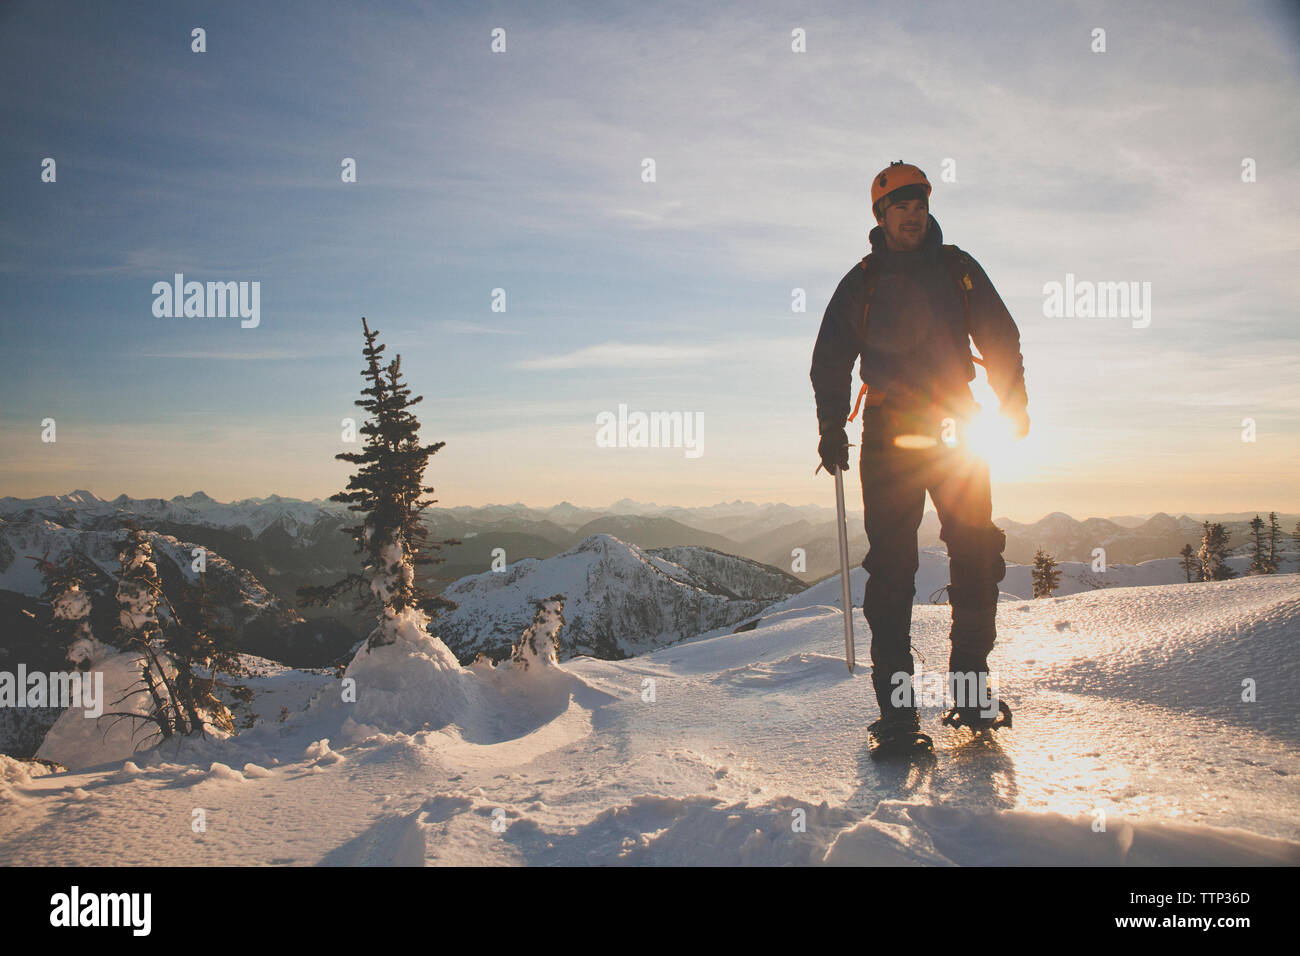 Full length of hiker with ice axe mountaineering on snowcapped mountains against sky during sunset Stock Photo